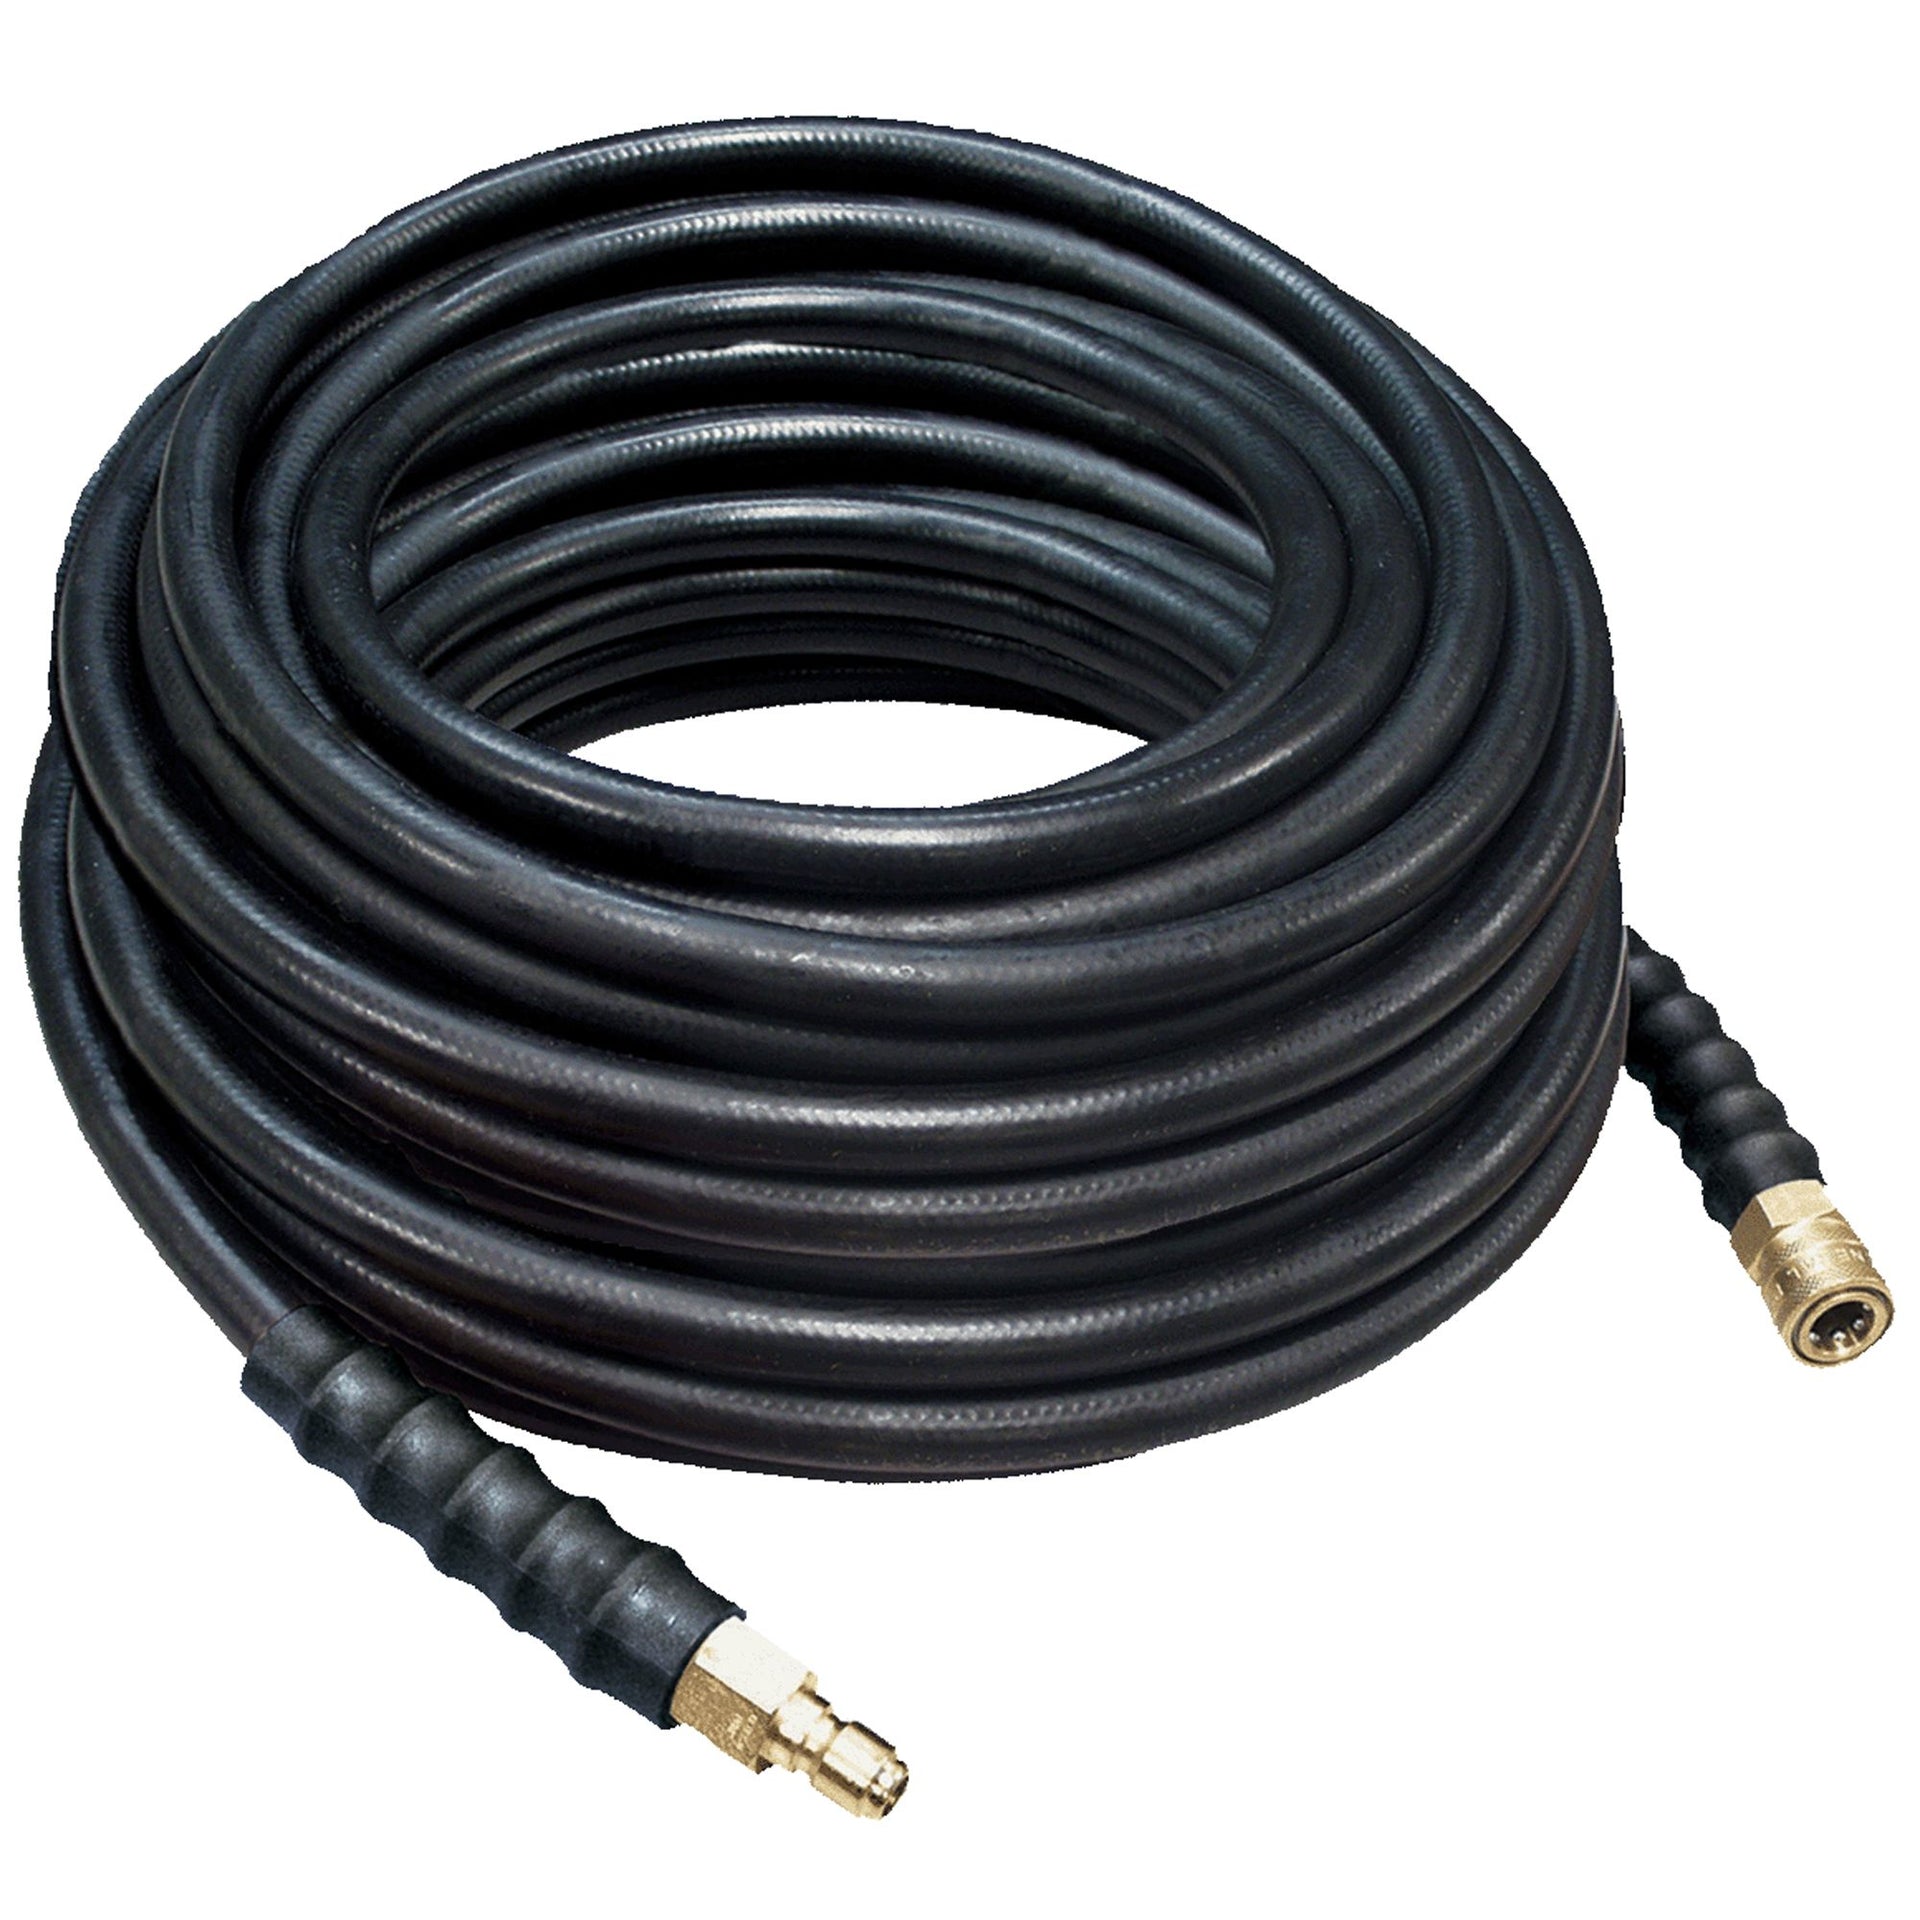 BE Power Equipment - BE Power Equipment - High Pressure Hose for a Pressure  Washer Hose. 50' x 3/8, 4,500 PSI .